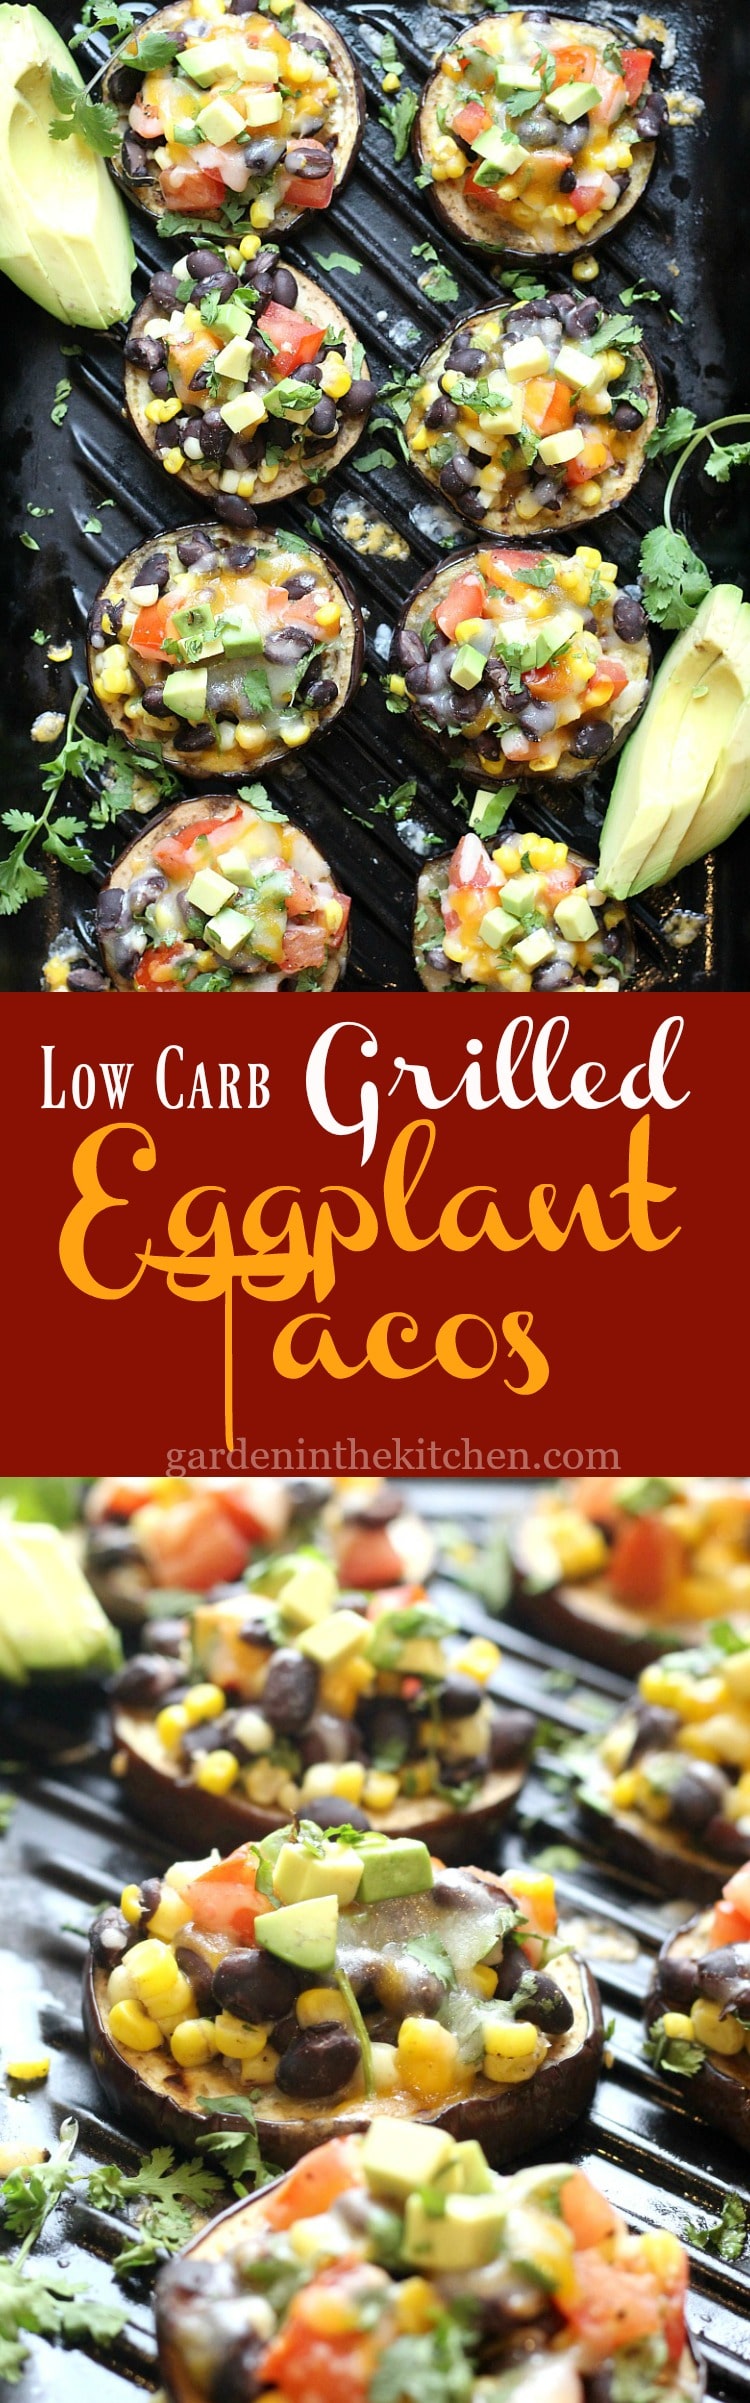 Low-Carb Grilled Eggplant Tacos 